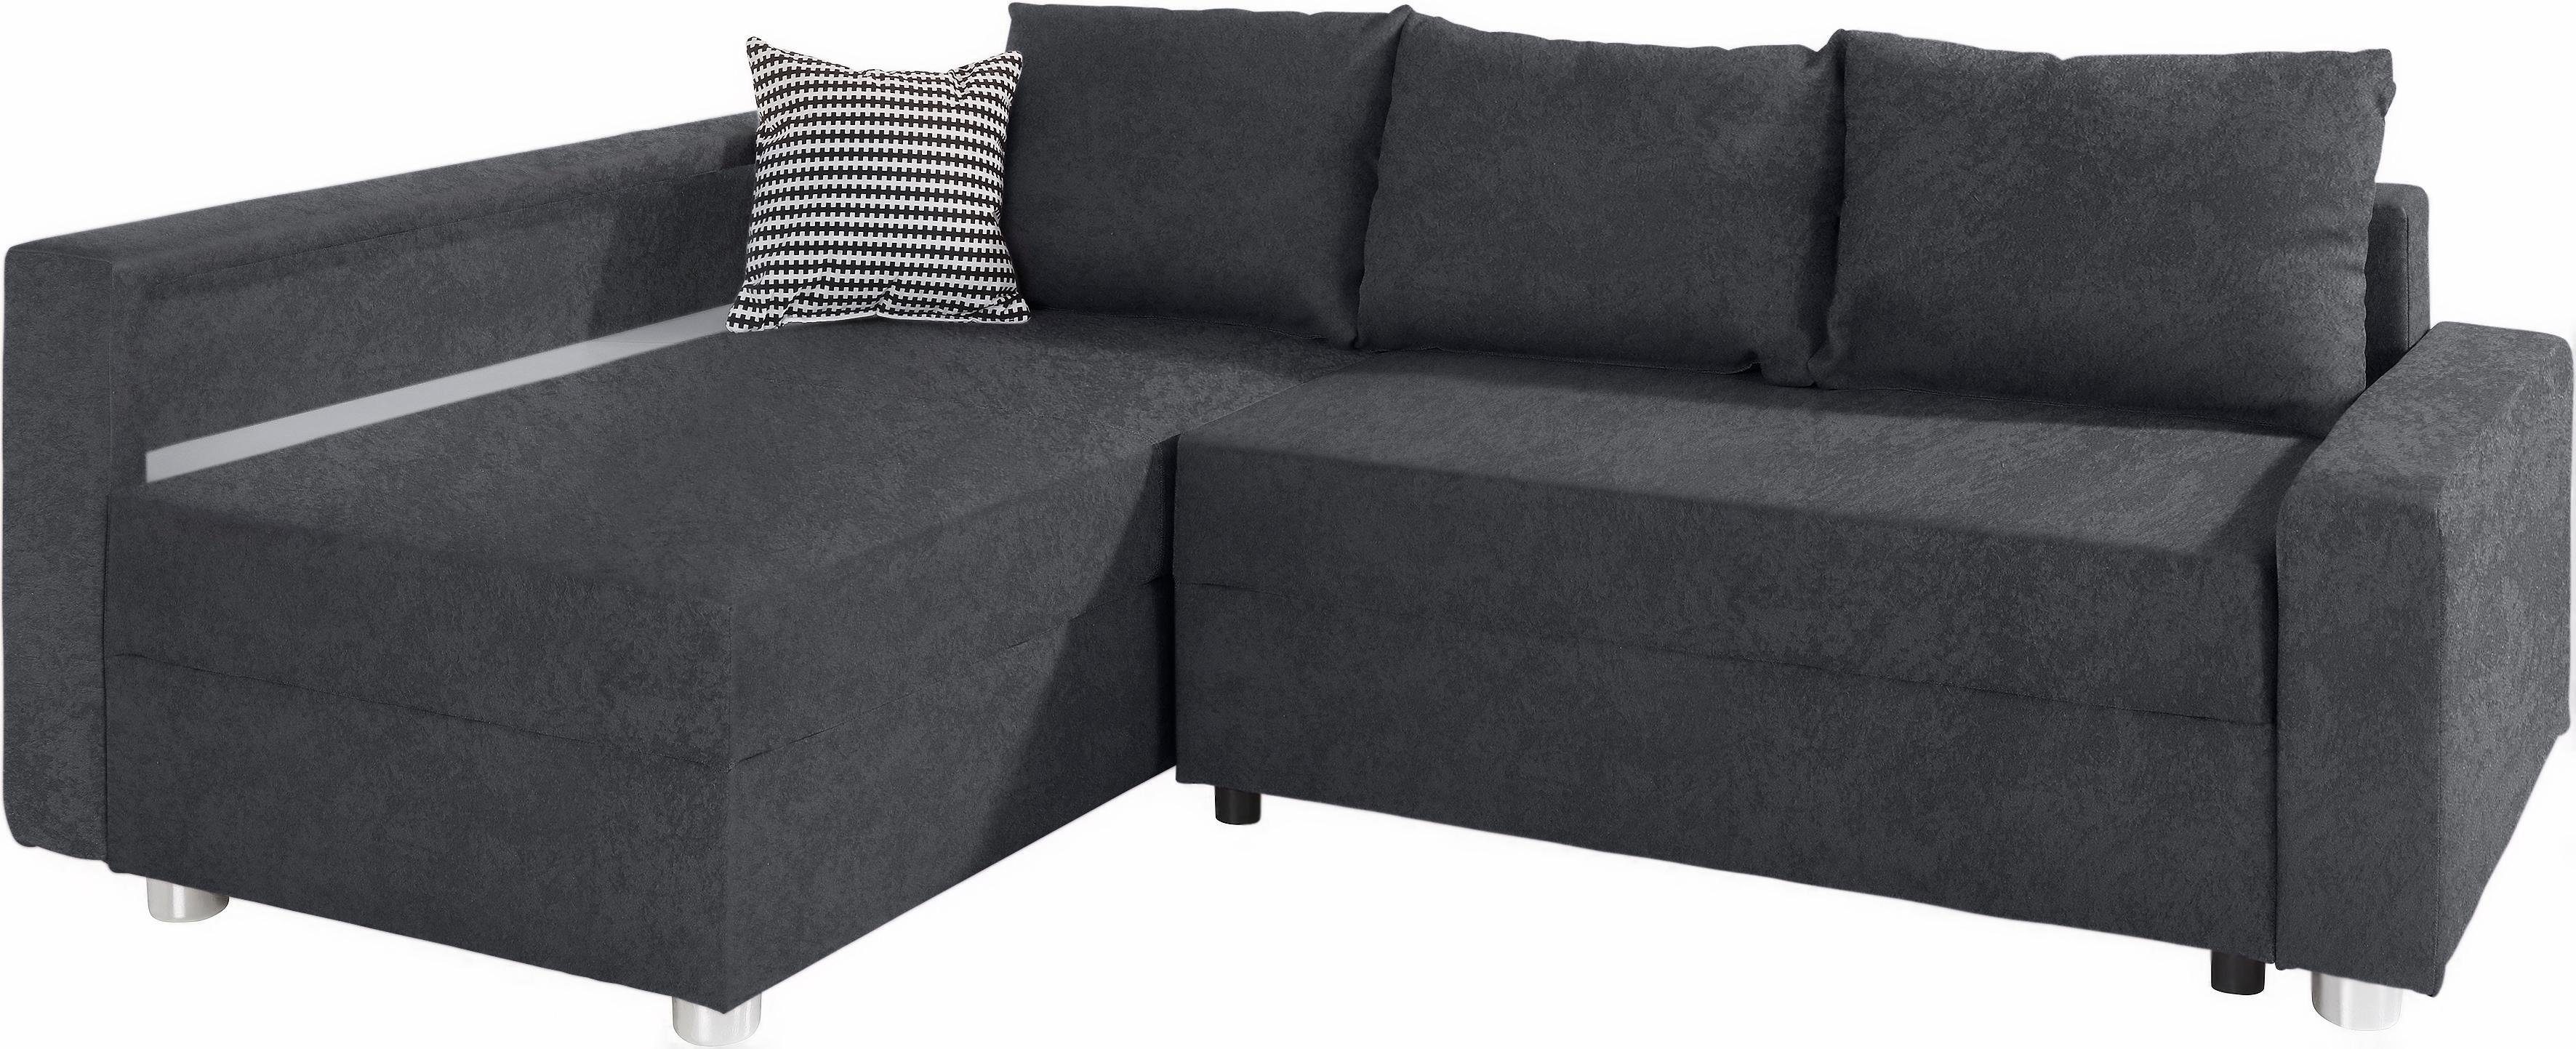 inklusive AB mit COLLECTION wahlweise Ecksofa Federkern, Bettfunktion, RGB-LED-Beleuchtung Relax,